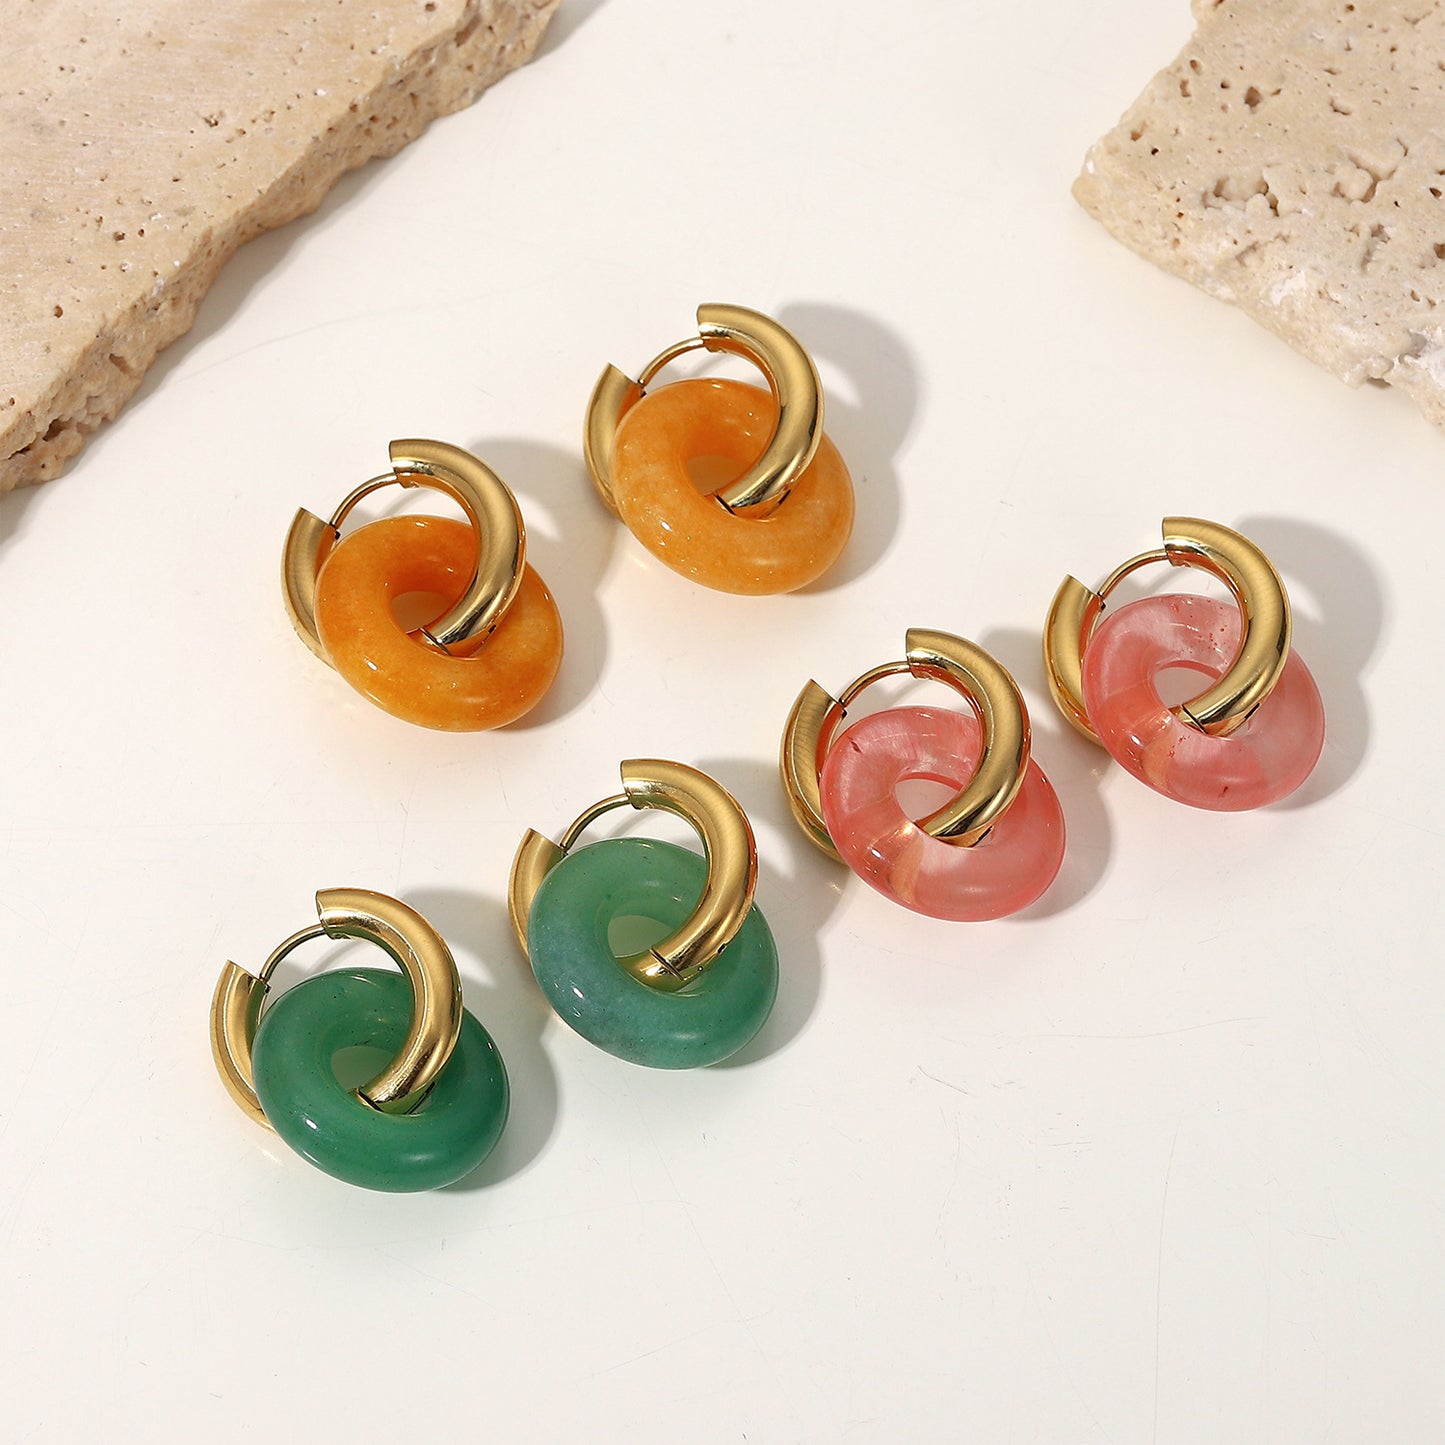 5pcs New Fashion Vintage Natural Stone Ring Earrings 14K Gold Plated Stainless Steel Earrings Style Earrings For Women